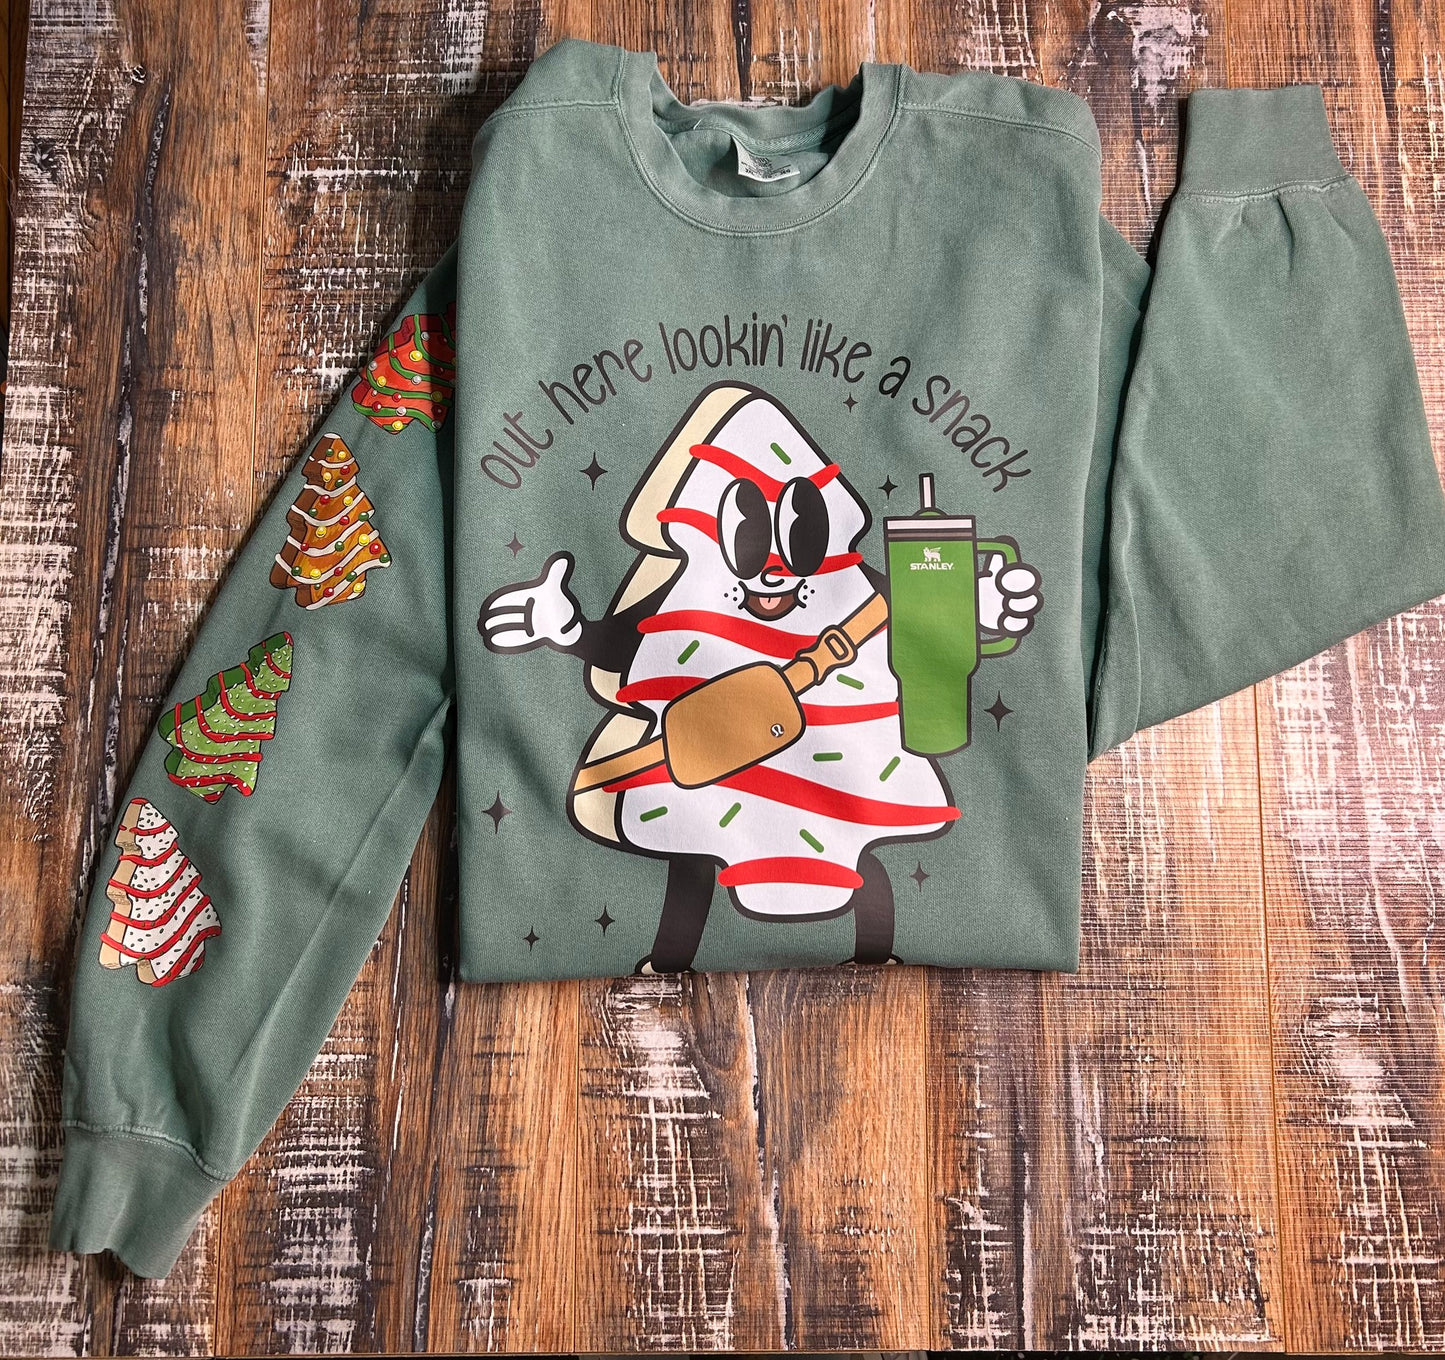 Boojee Looking Like a Snack Shirt, Boojee Christmas Sweatshirt, Christmas Tree Shirt, Holiday Gifts For Women, Funny Christmas Sweater